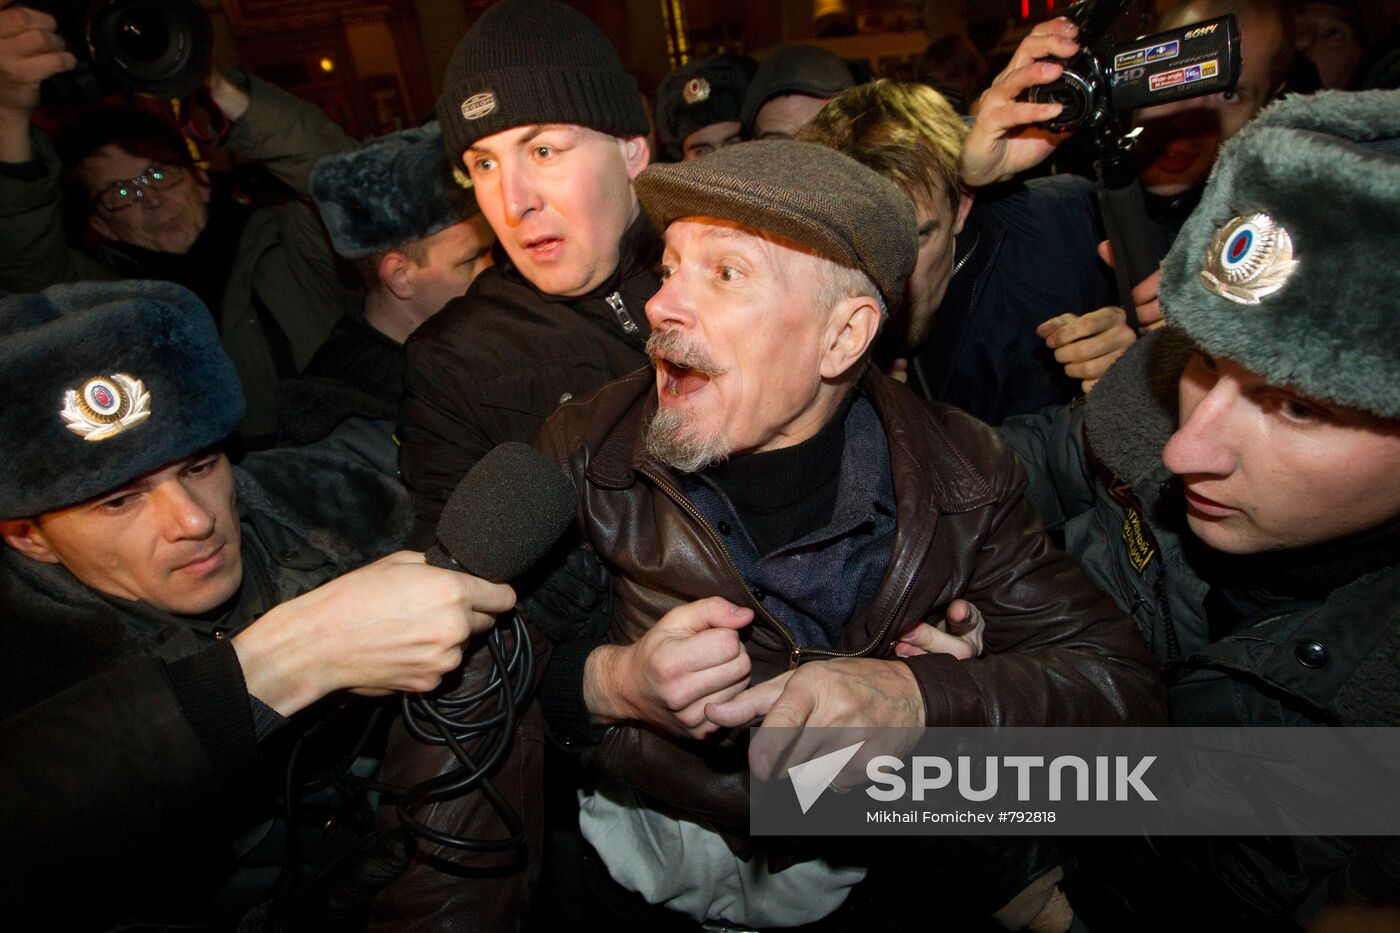 Rally in defense of 31st article of Russia's Constitution